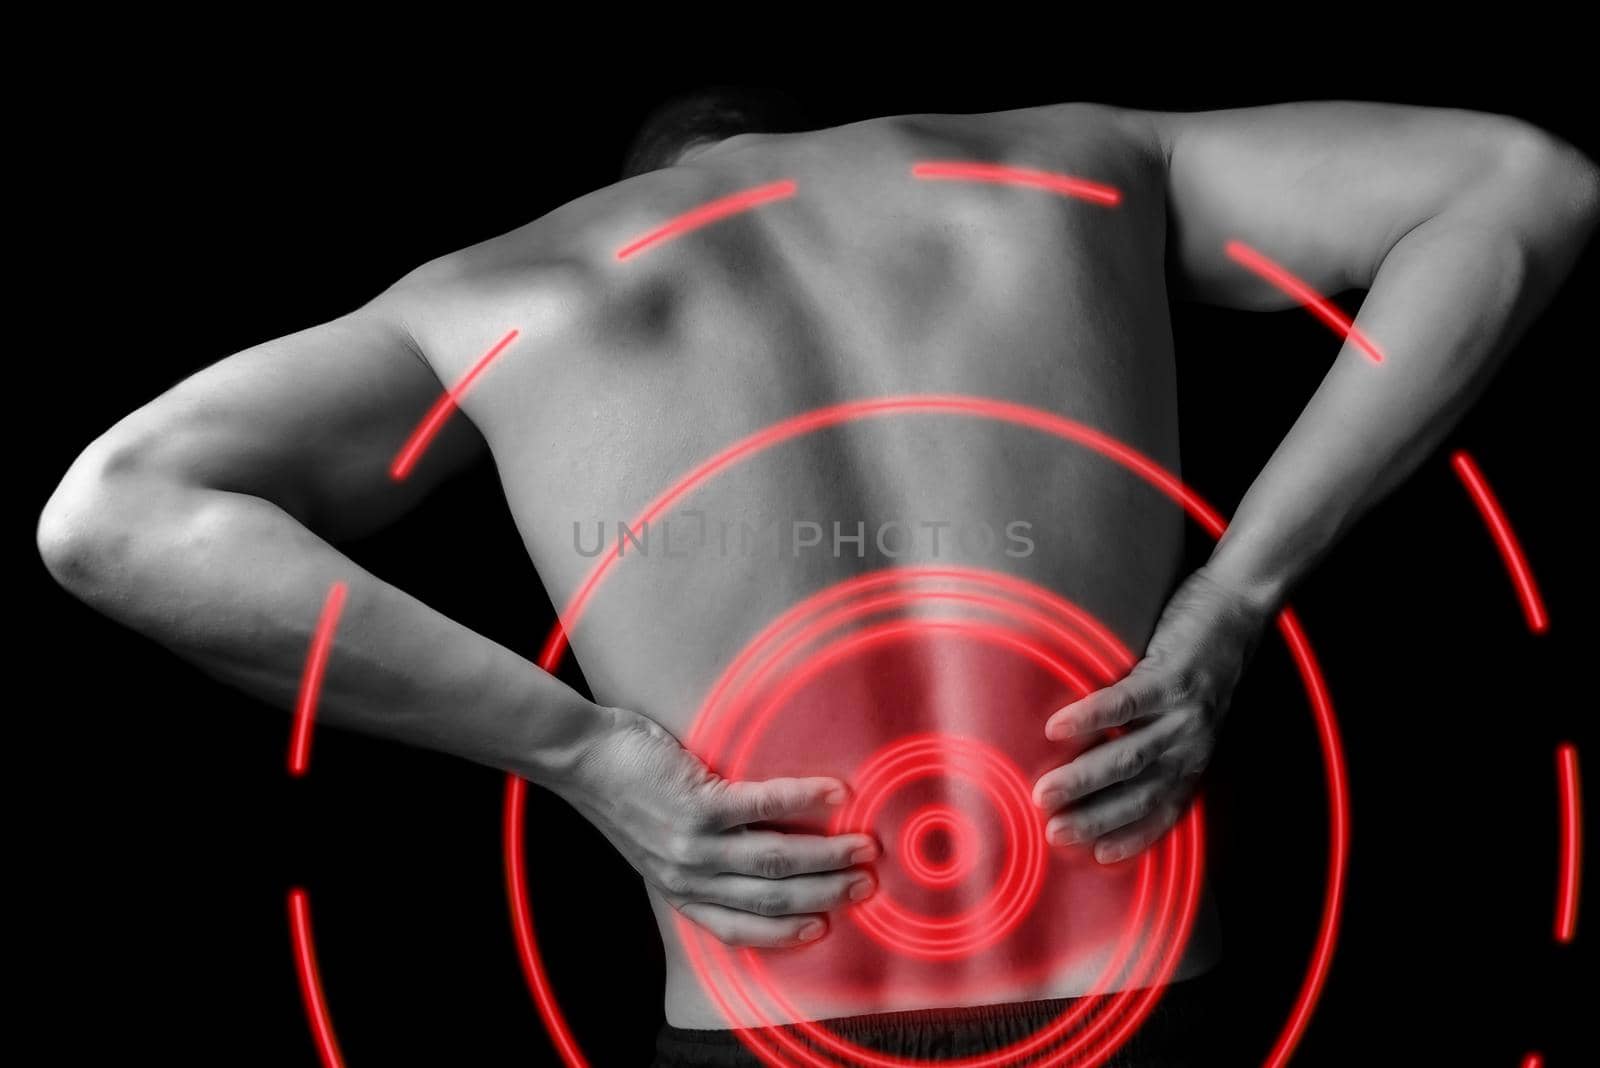 Acute pain in a male lower back, monochrome image, pain area of red color